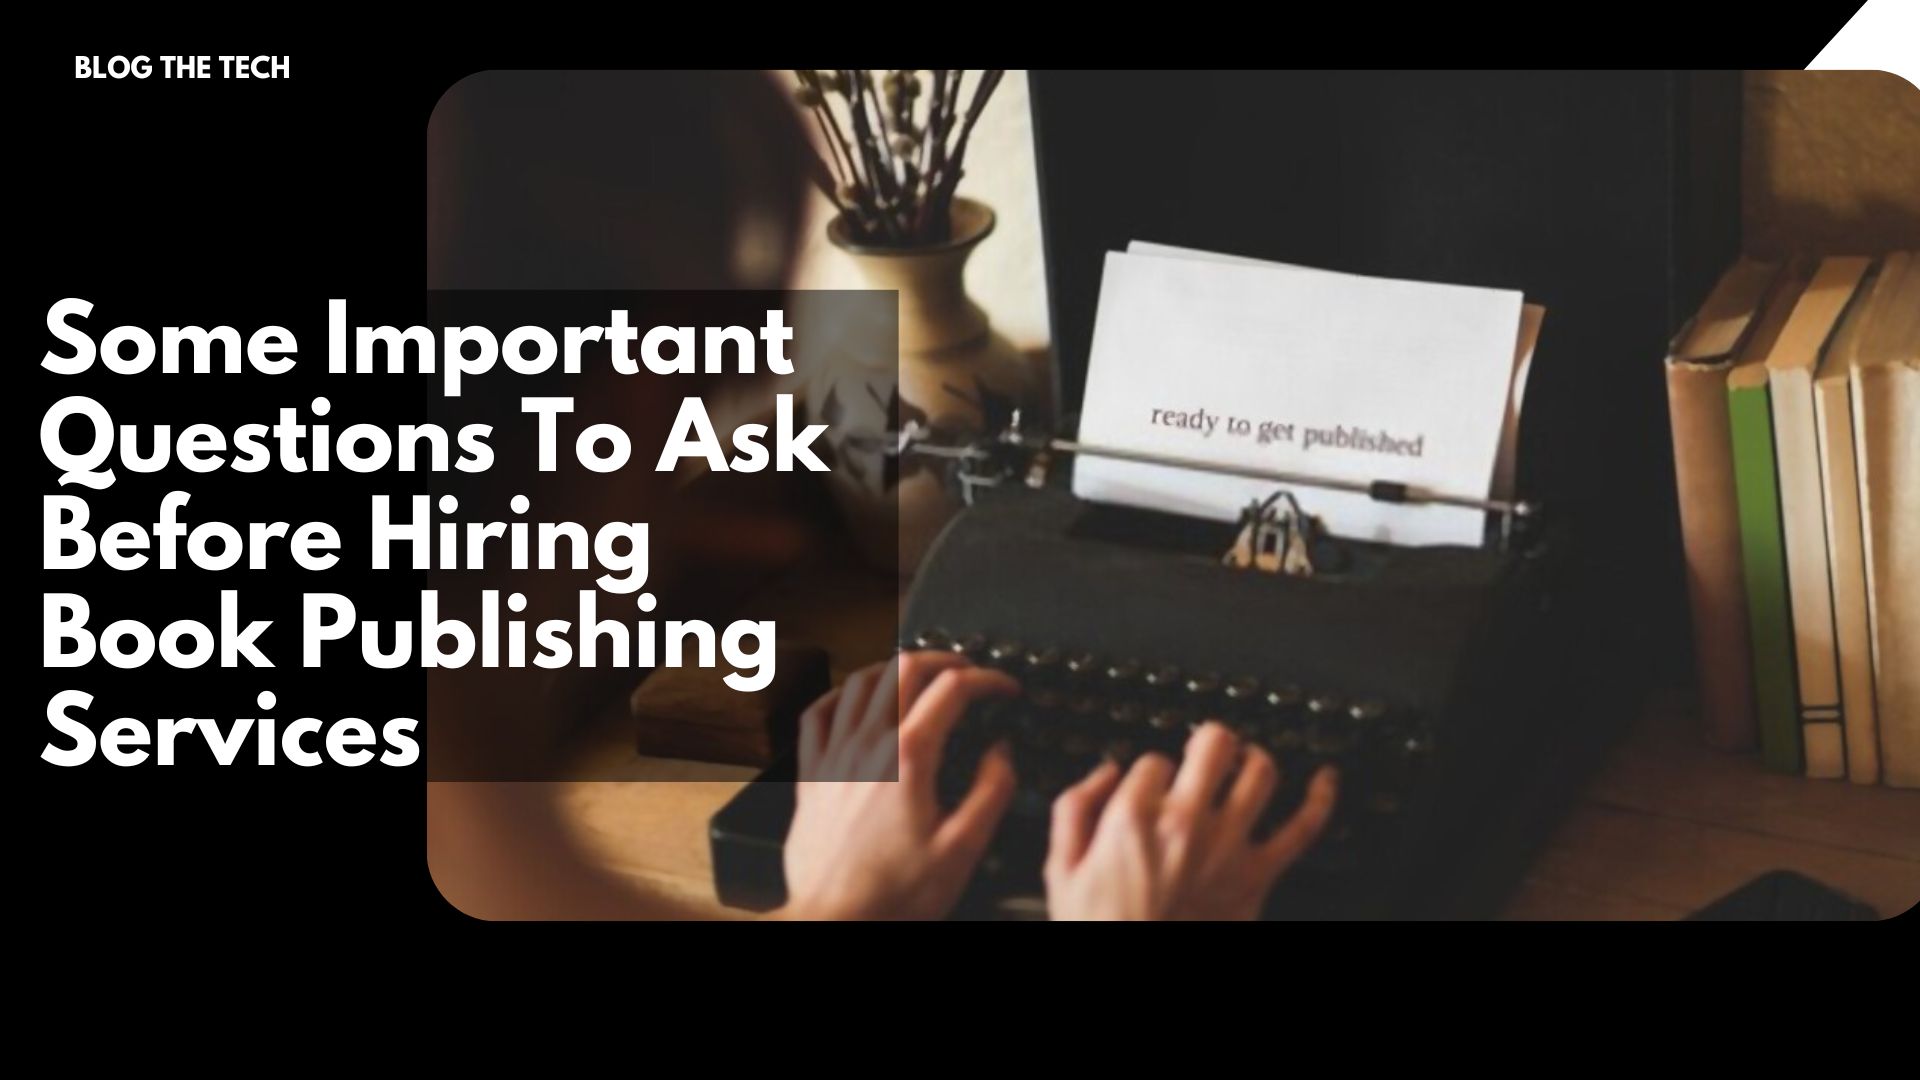 Some Important Questions To Ask Before Hiring Book Publishing Services